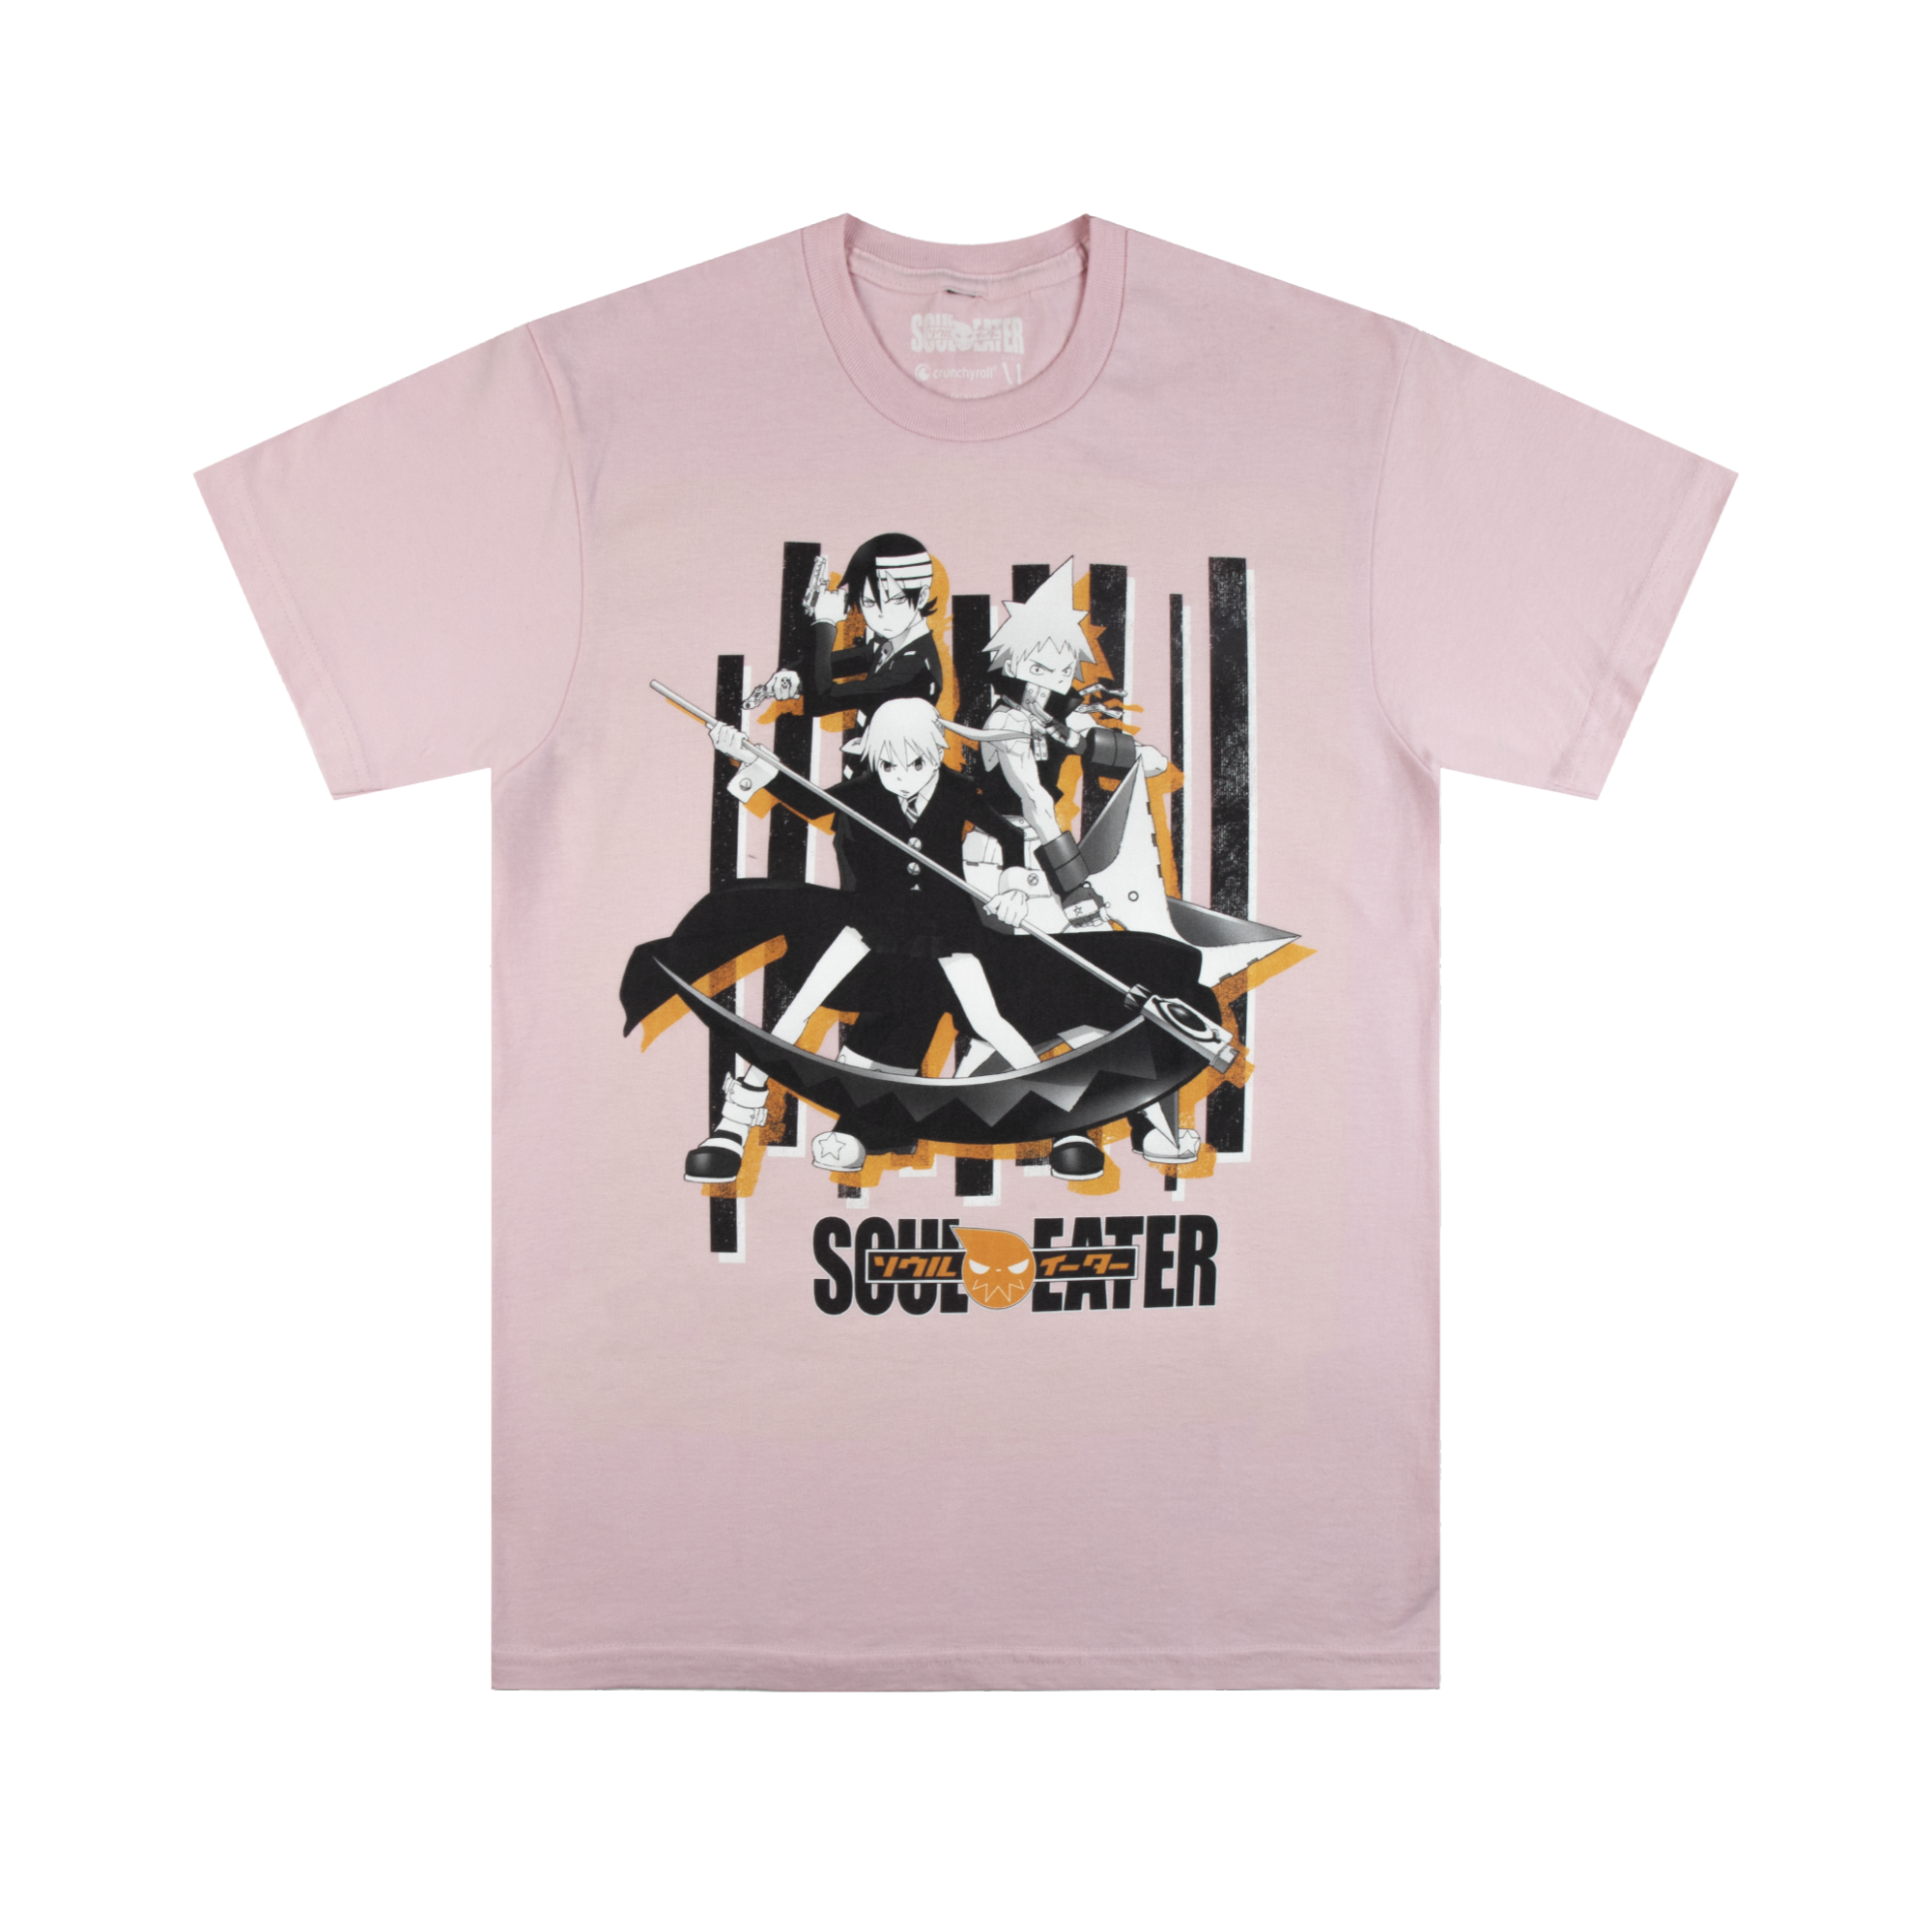 Weapon Meister Pink Tee